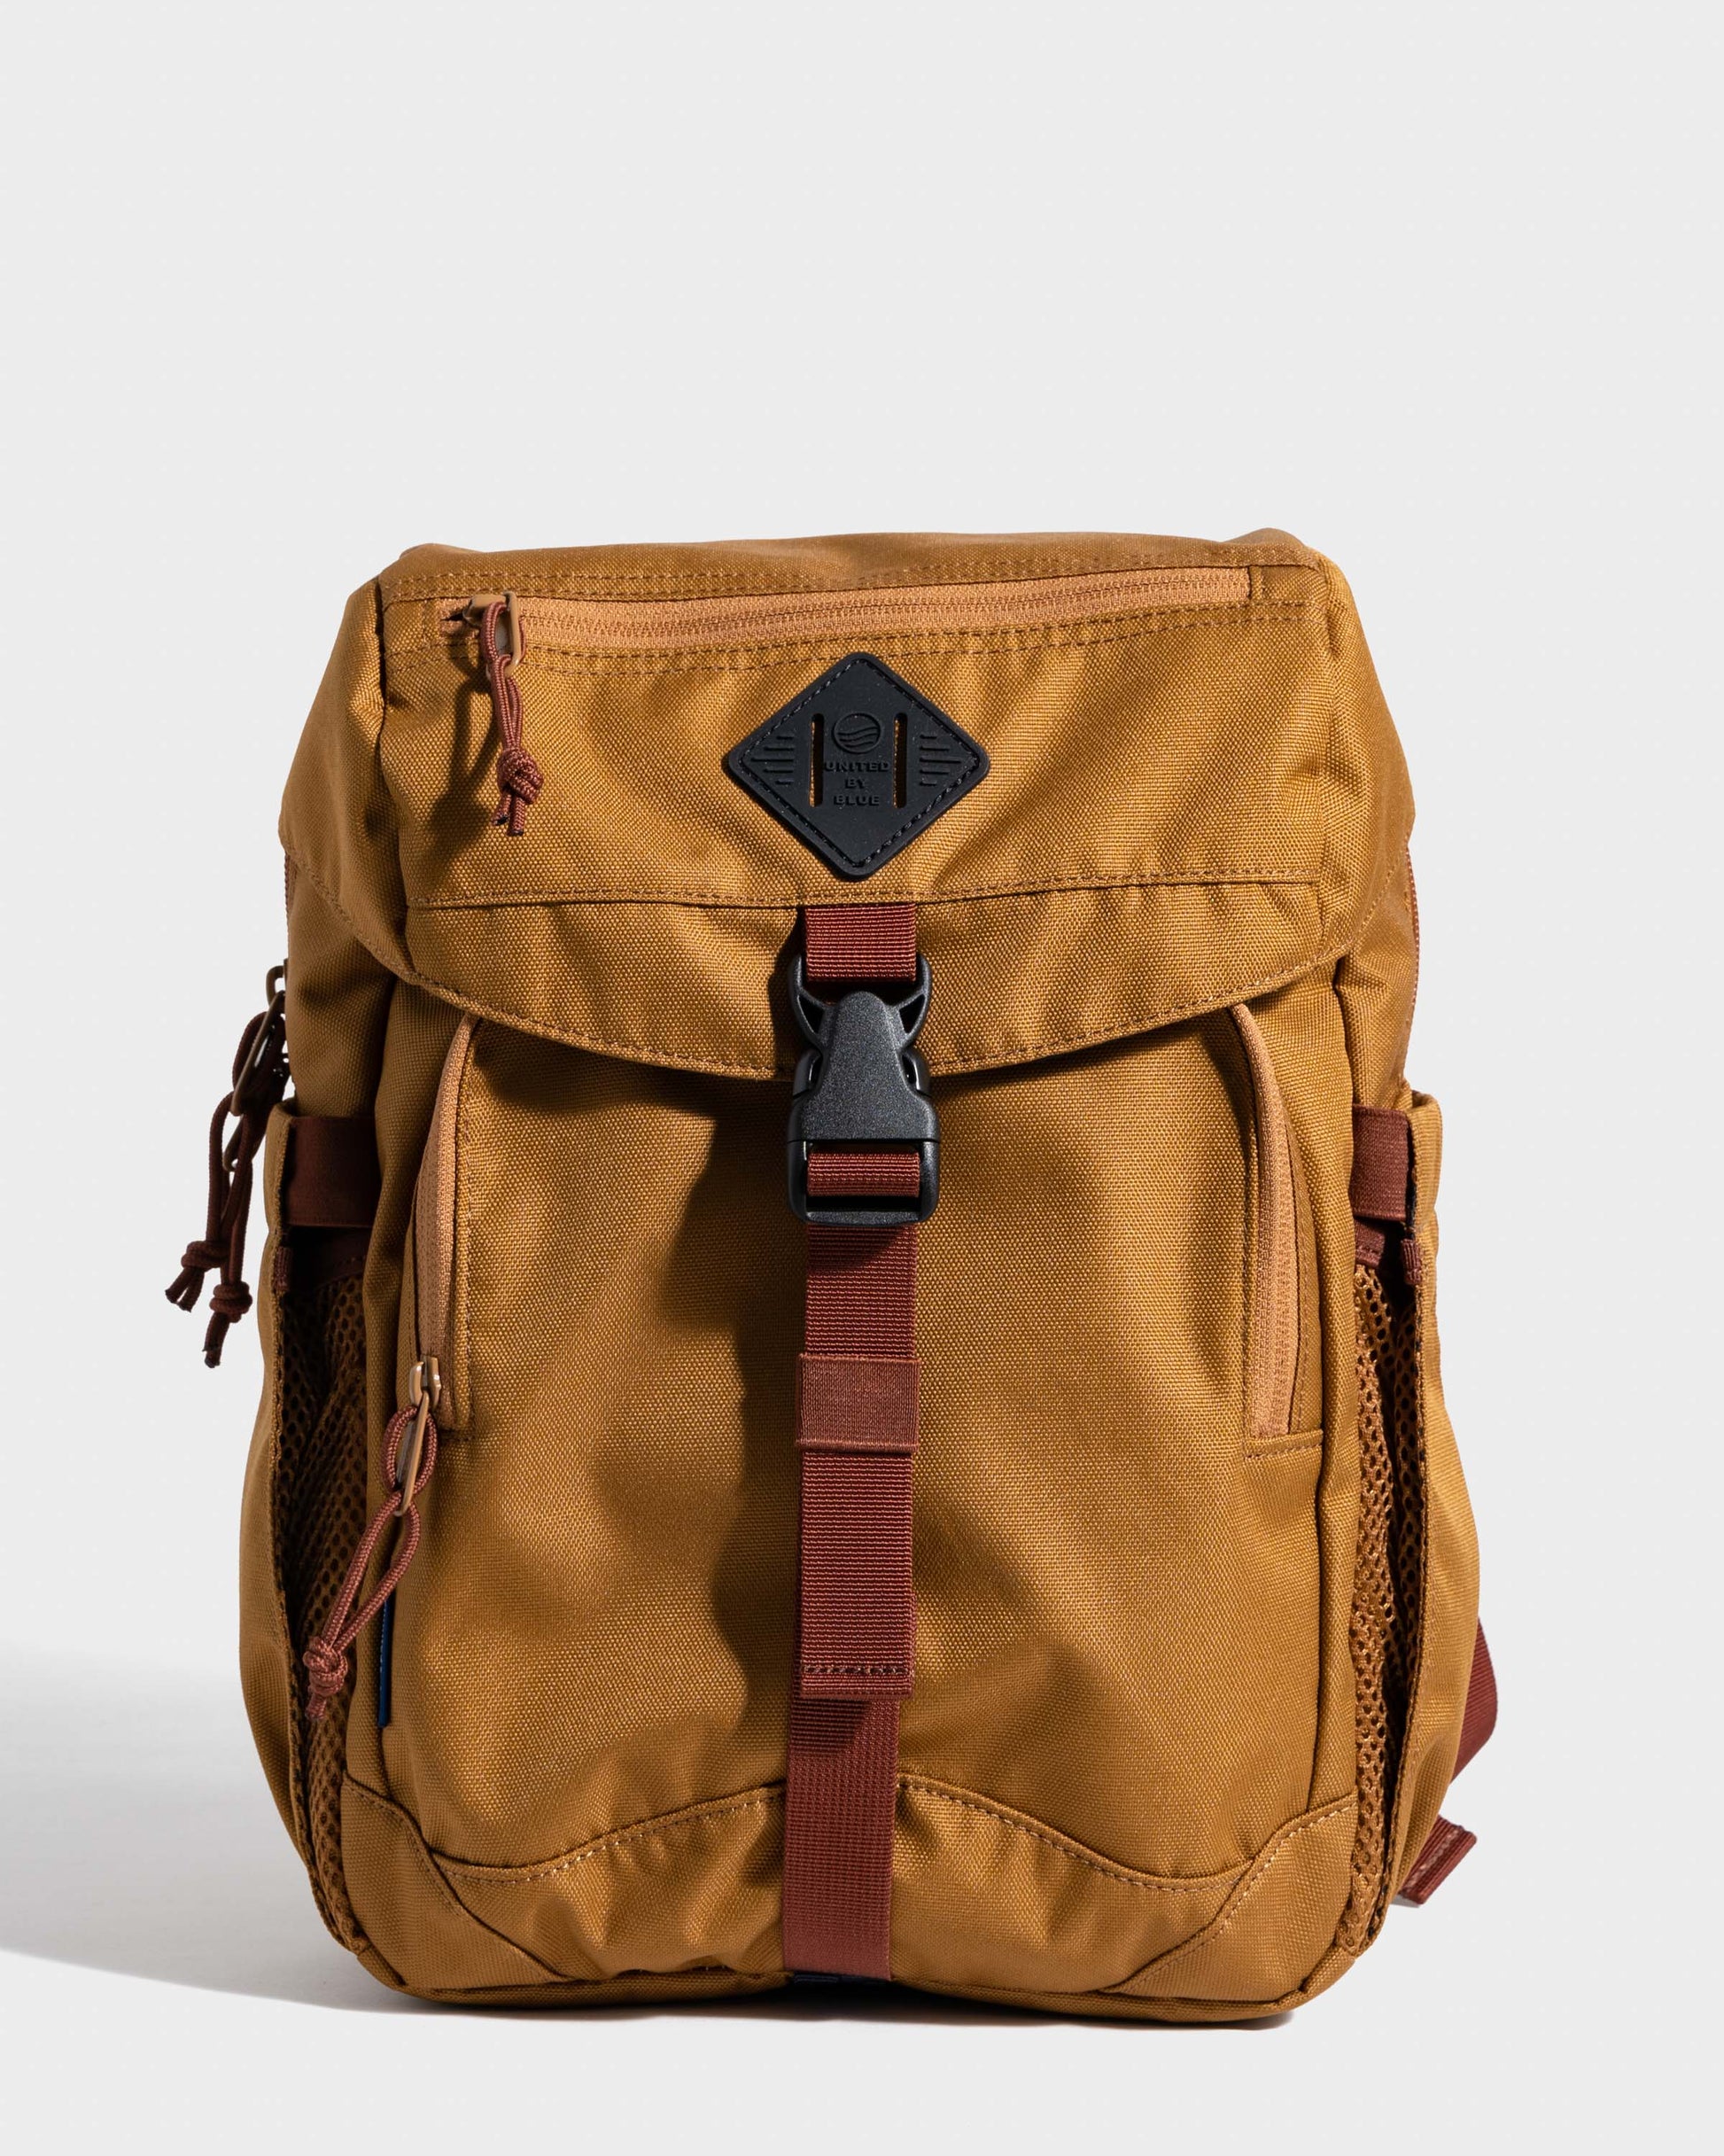 United By Blue (R)evolution 9L Sidekick Backpack  Urban Outfitters Japan -  Clothing, Music, Home & Accessories